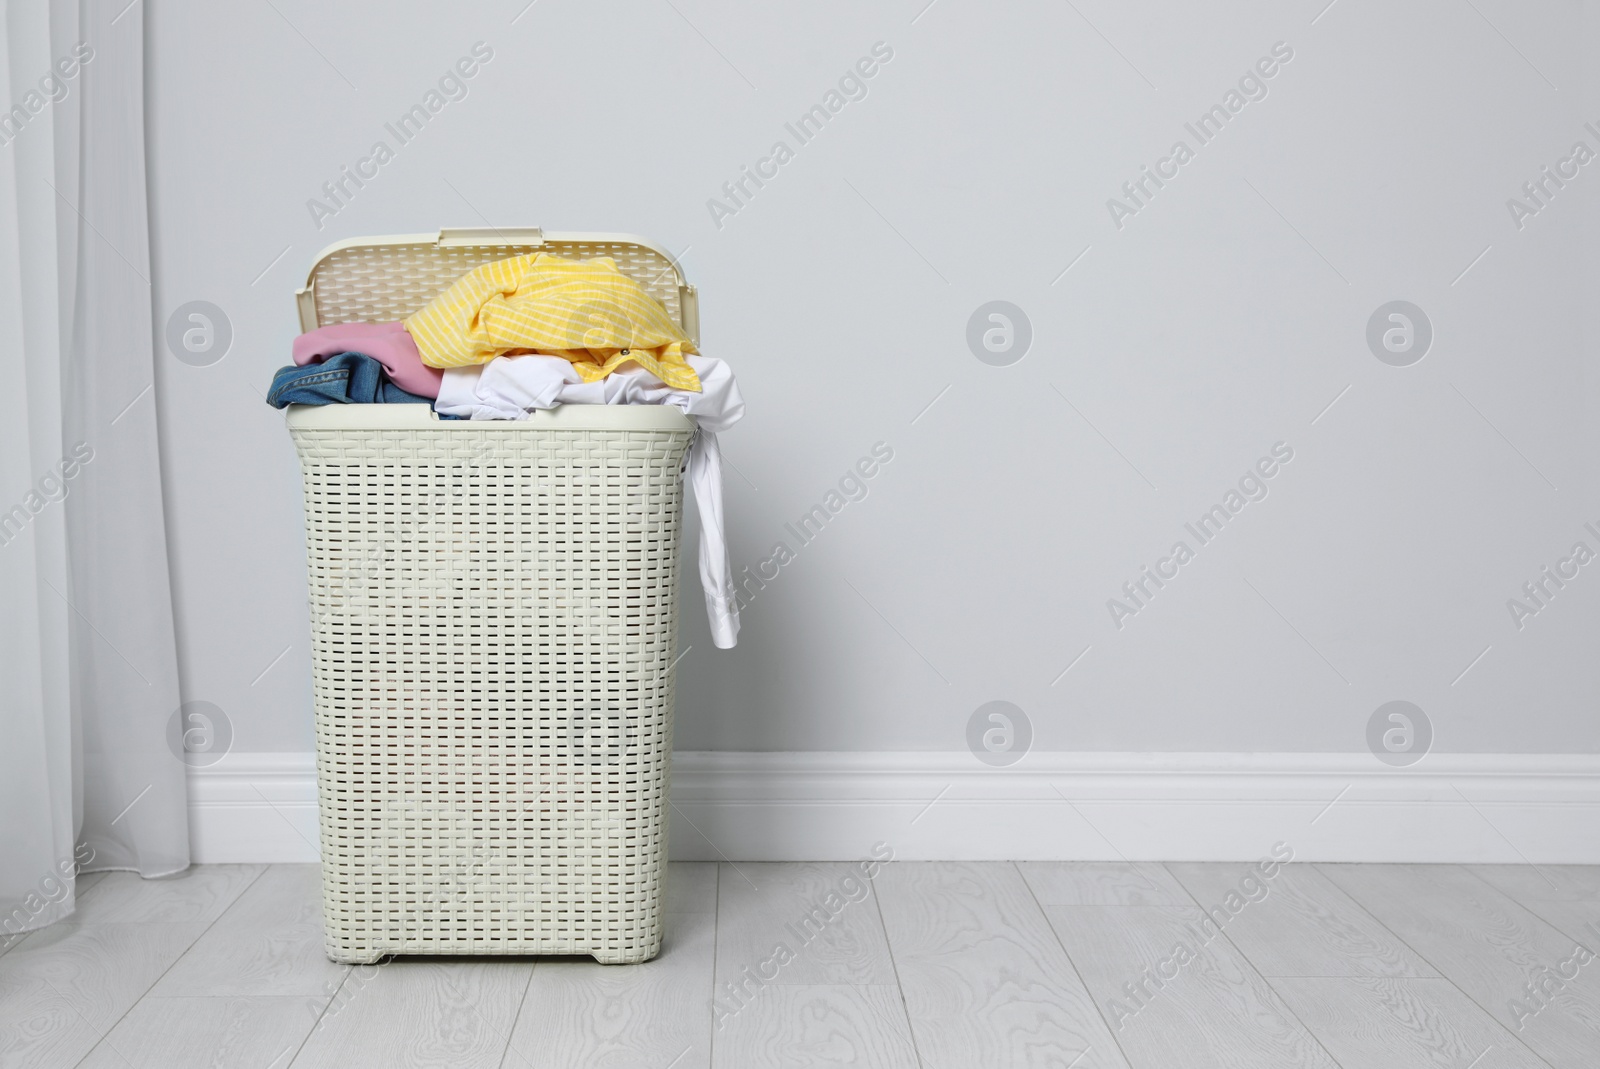 Photo of Plastic laundry basket full of dirty clothes on floor near light wall. Space for text